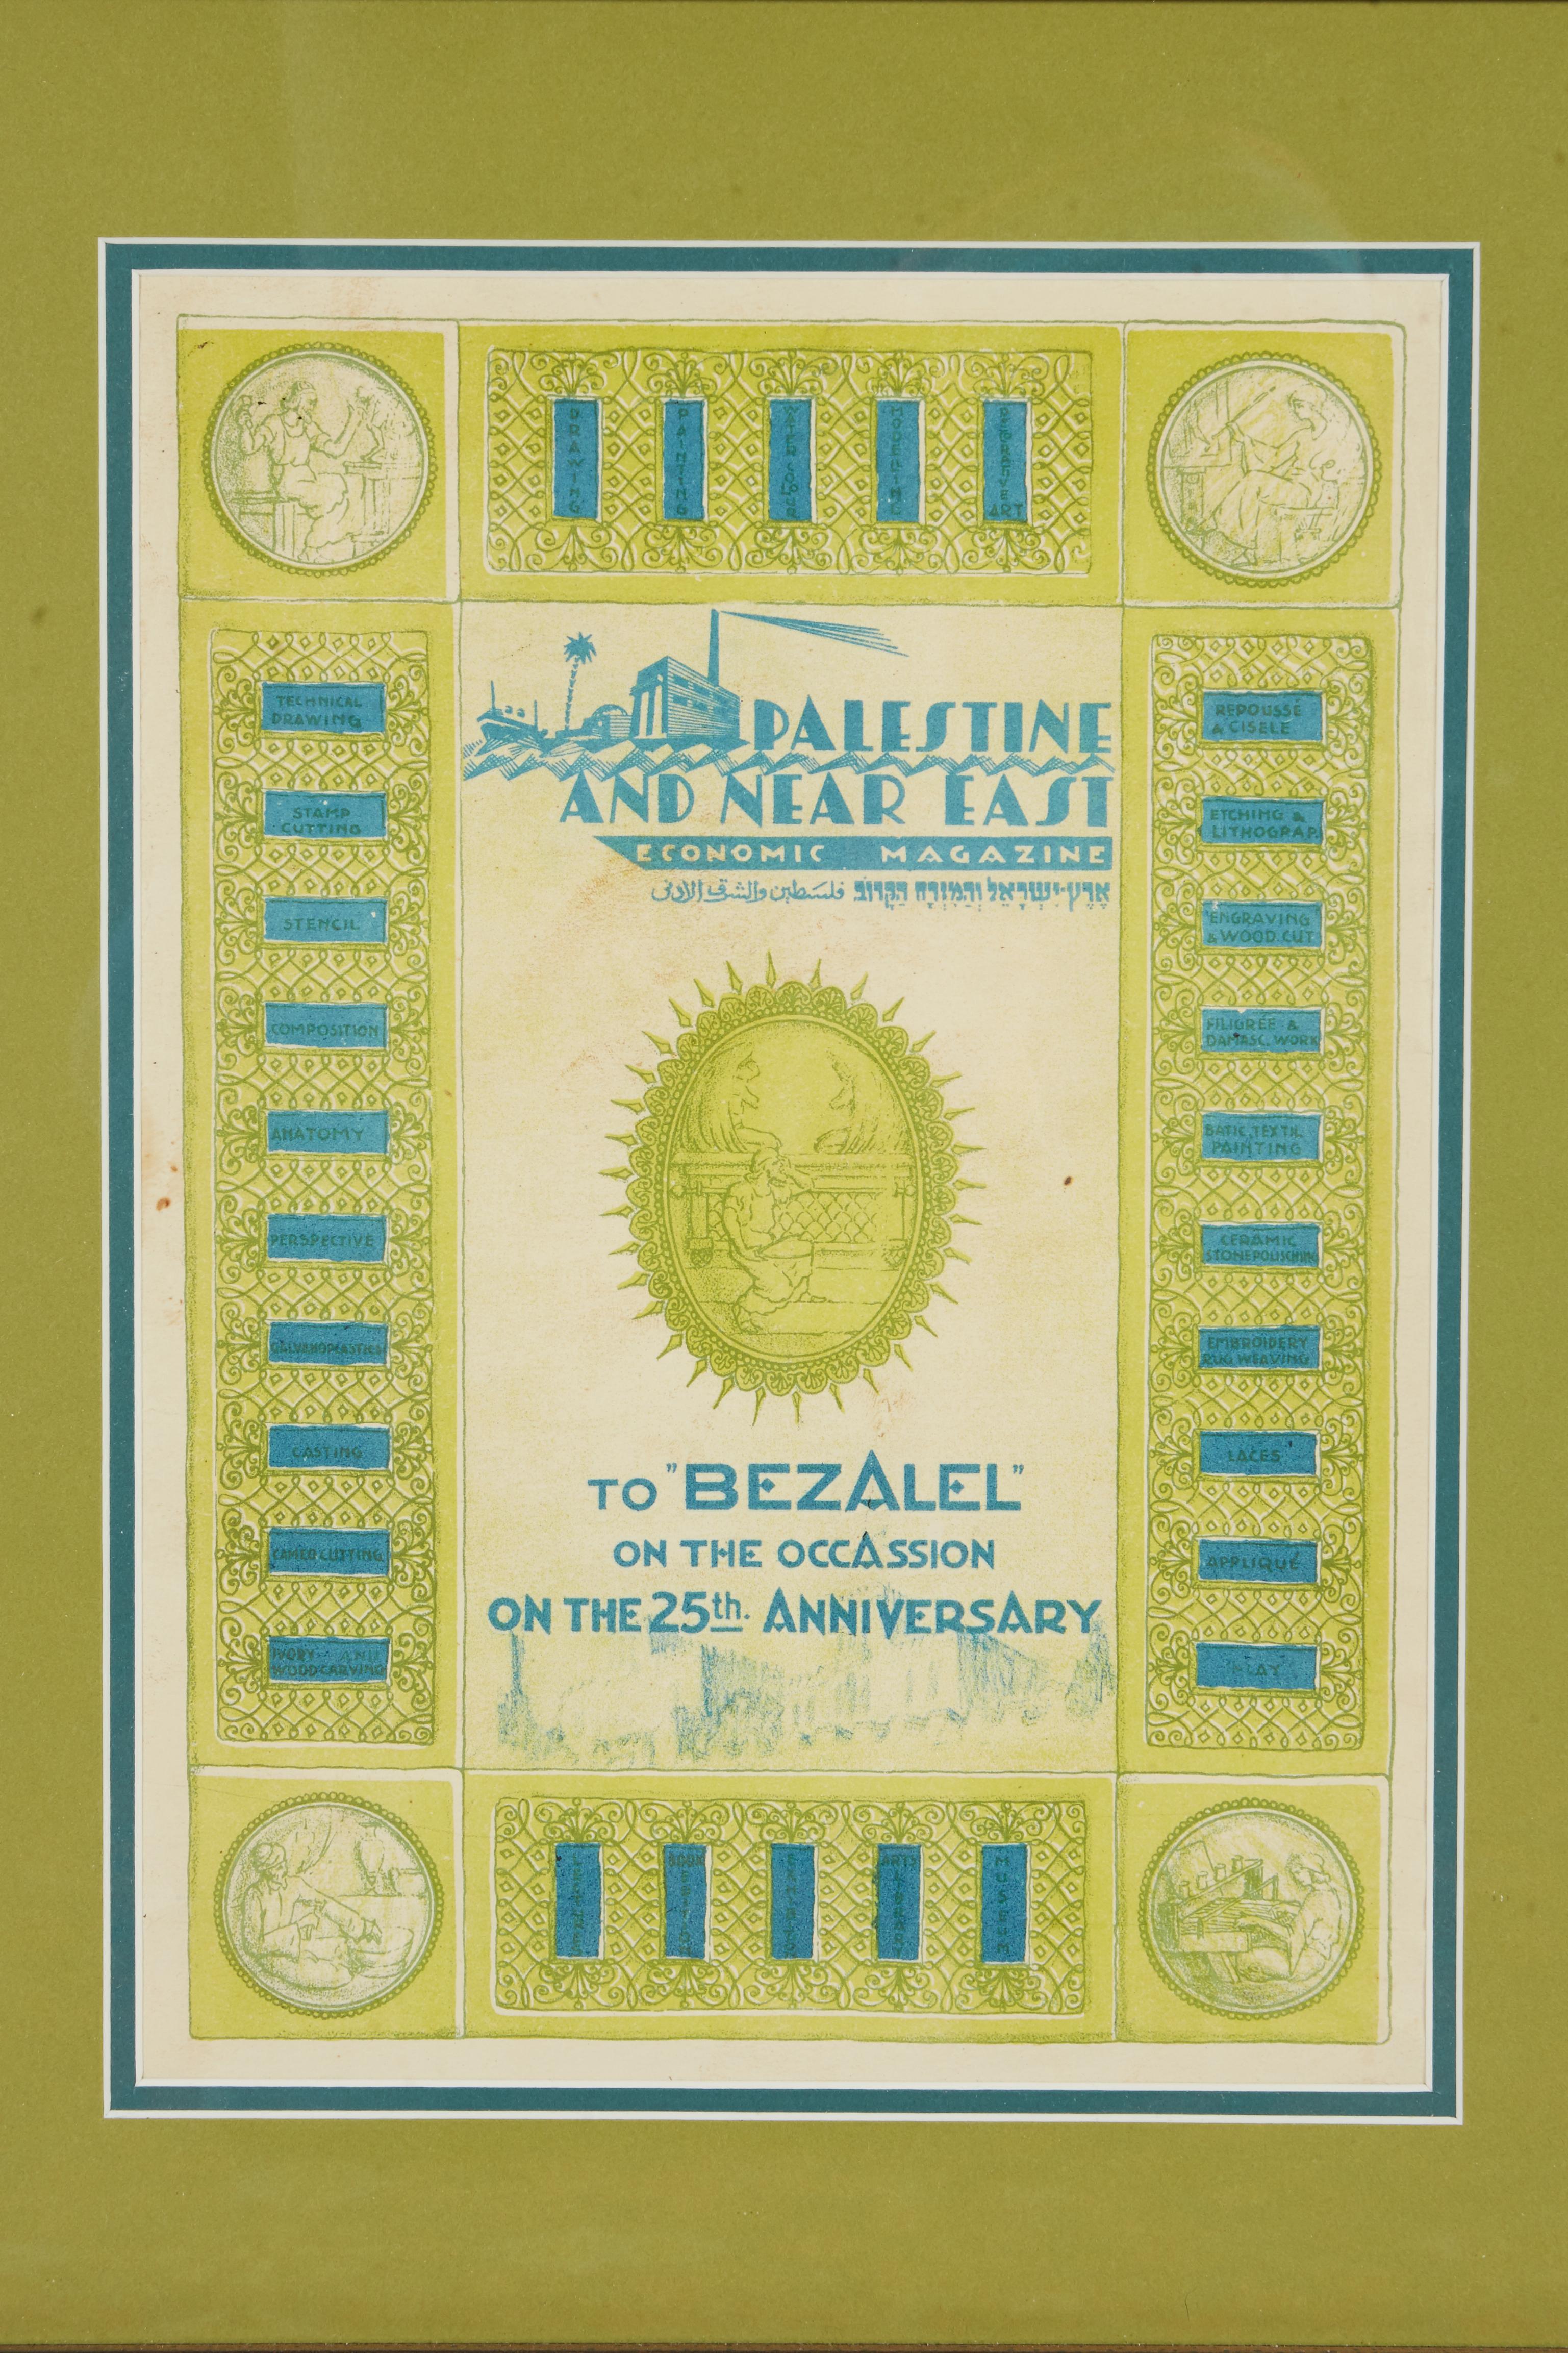 Framed print on paper for 25th Anniversary of Bezalel Arts & Craft school in Jerusalem.
The print - 